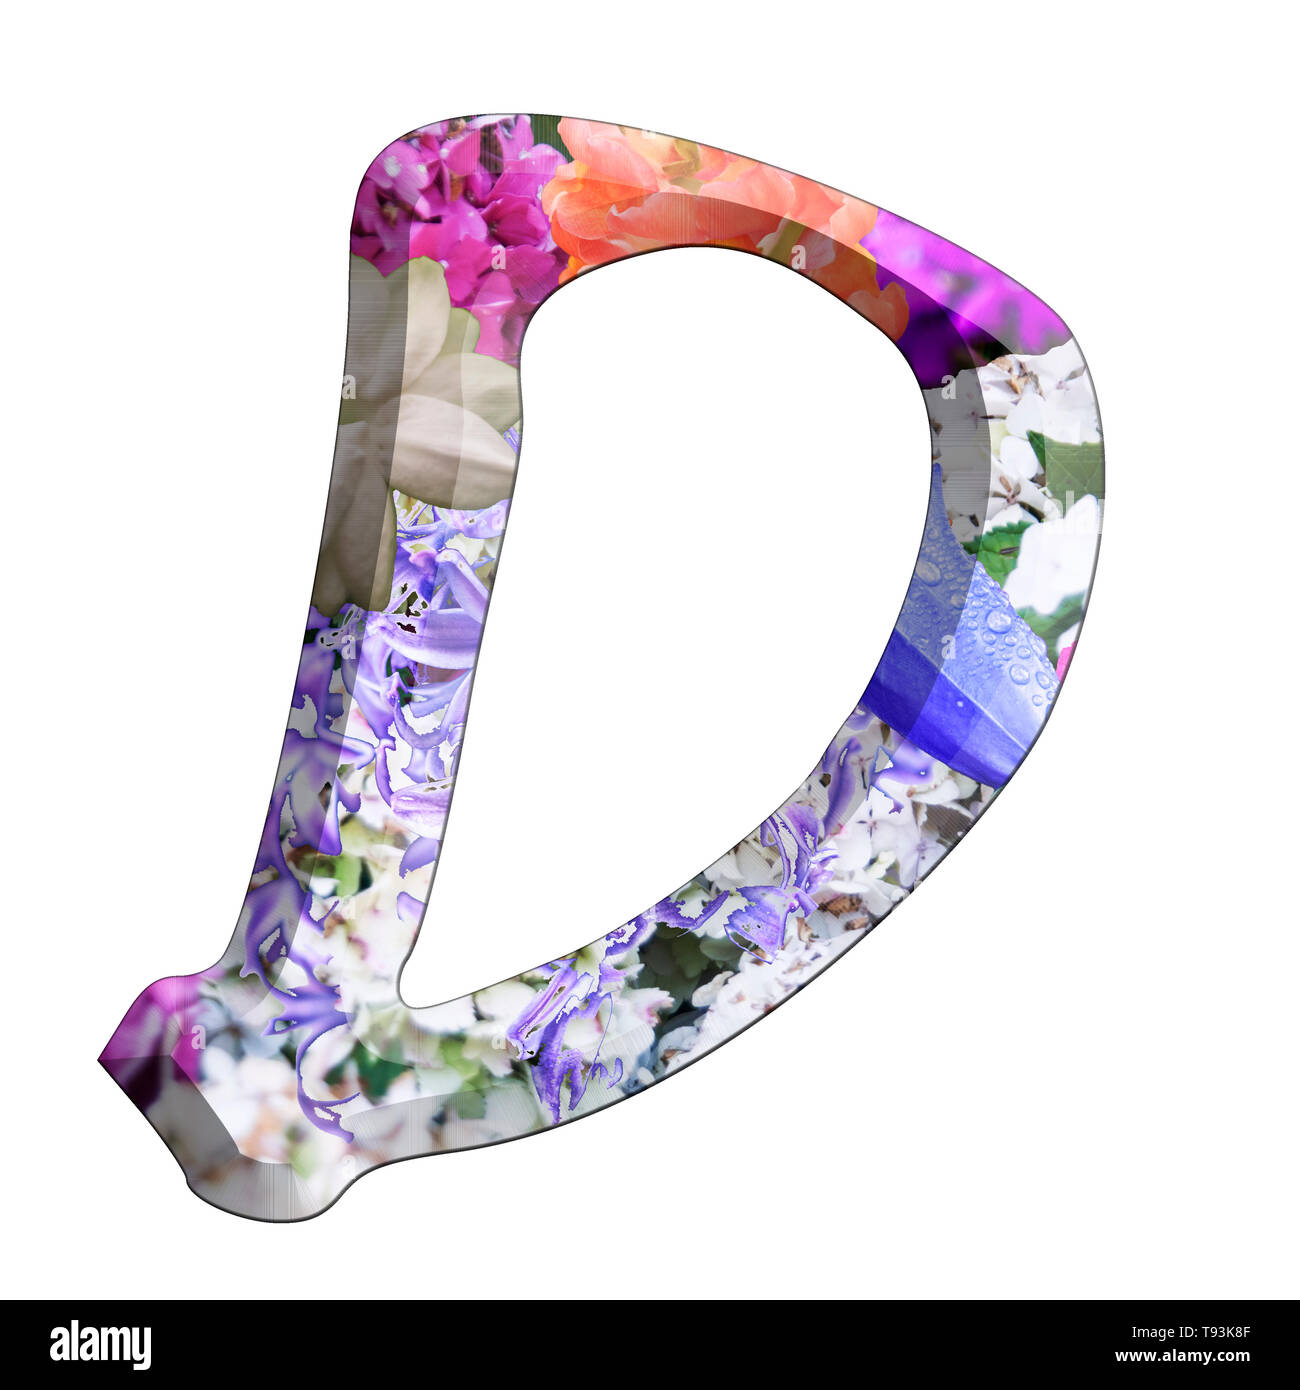 The Capitol Letter D Part of a set of letters, Numbers and symbols of 3D Alphabet made with colourful floral images on white background Stock Photo